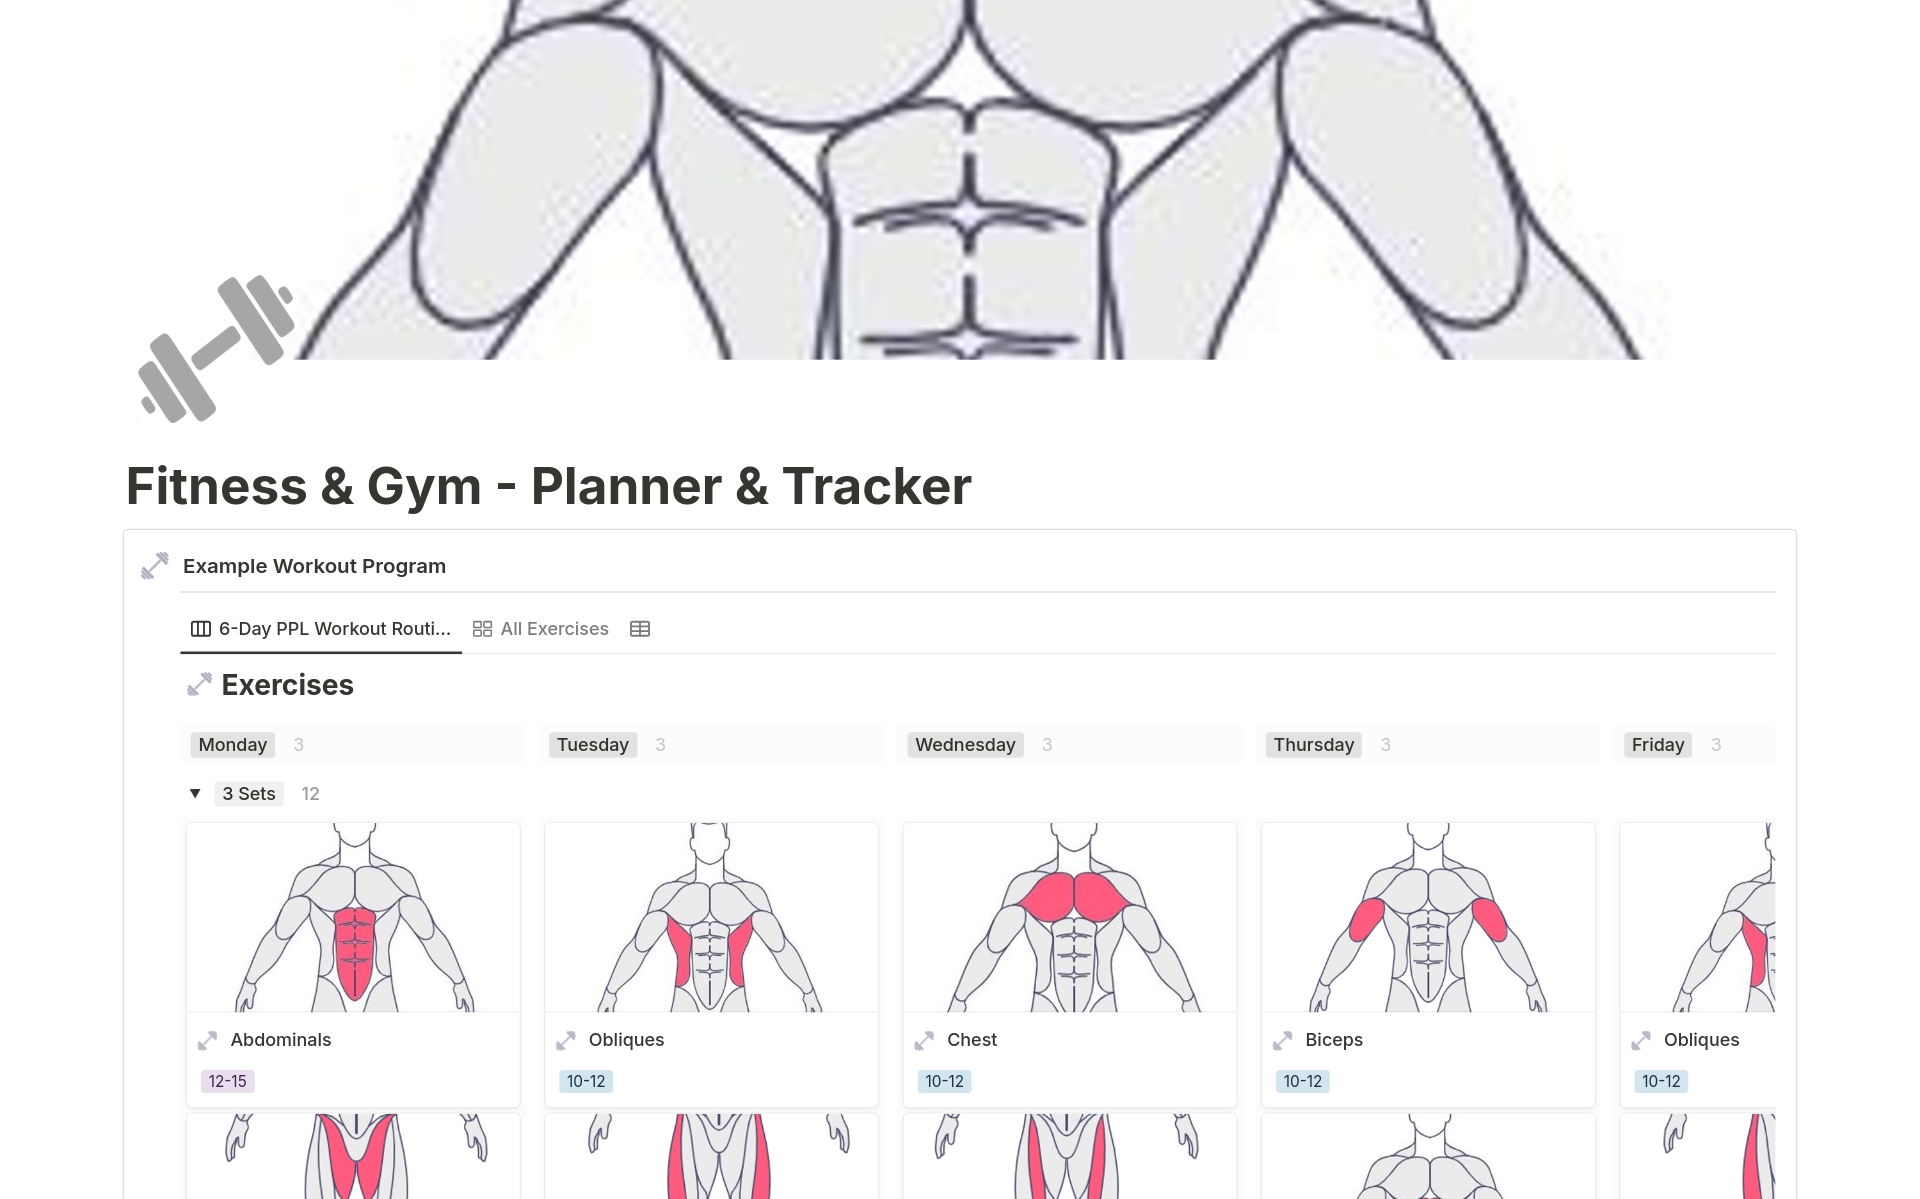 This Notion fitness and gym planner helps you achieve your fitness goals with sections for different muscle groups, links to instructional videos, workout tracking, goal setting, and progress monitoring, providing a customizable and structured approach to fitness.